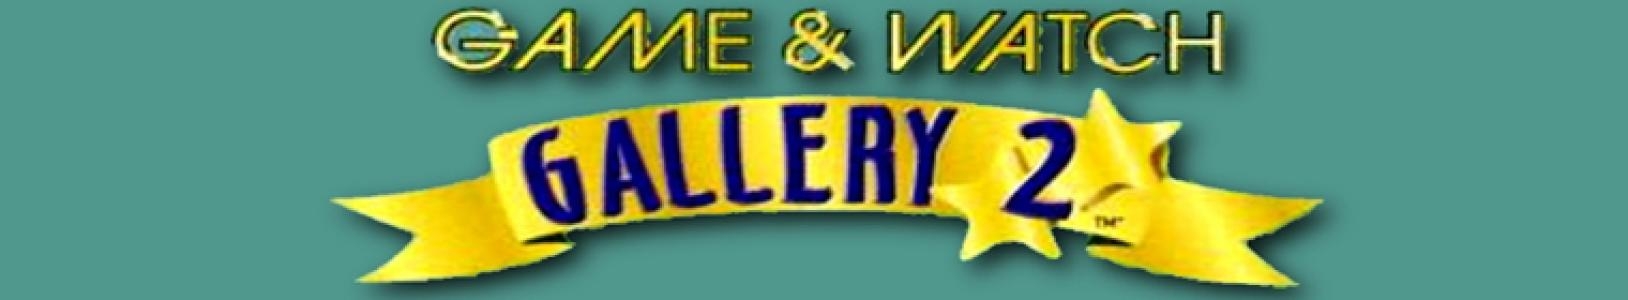 Game & Watch Gallery 2 banner